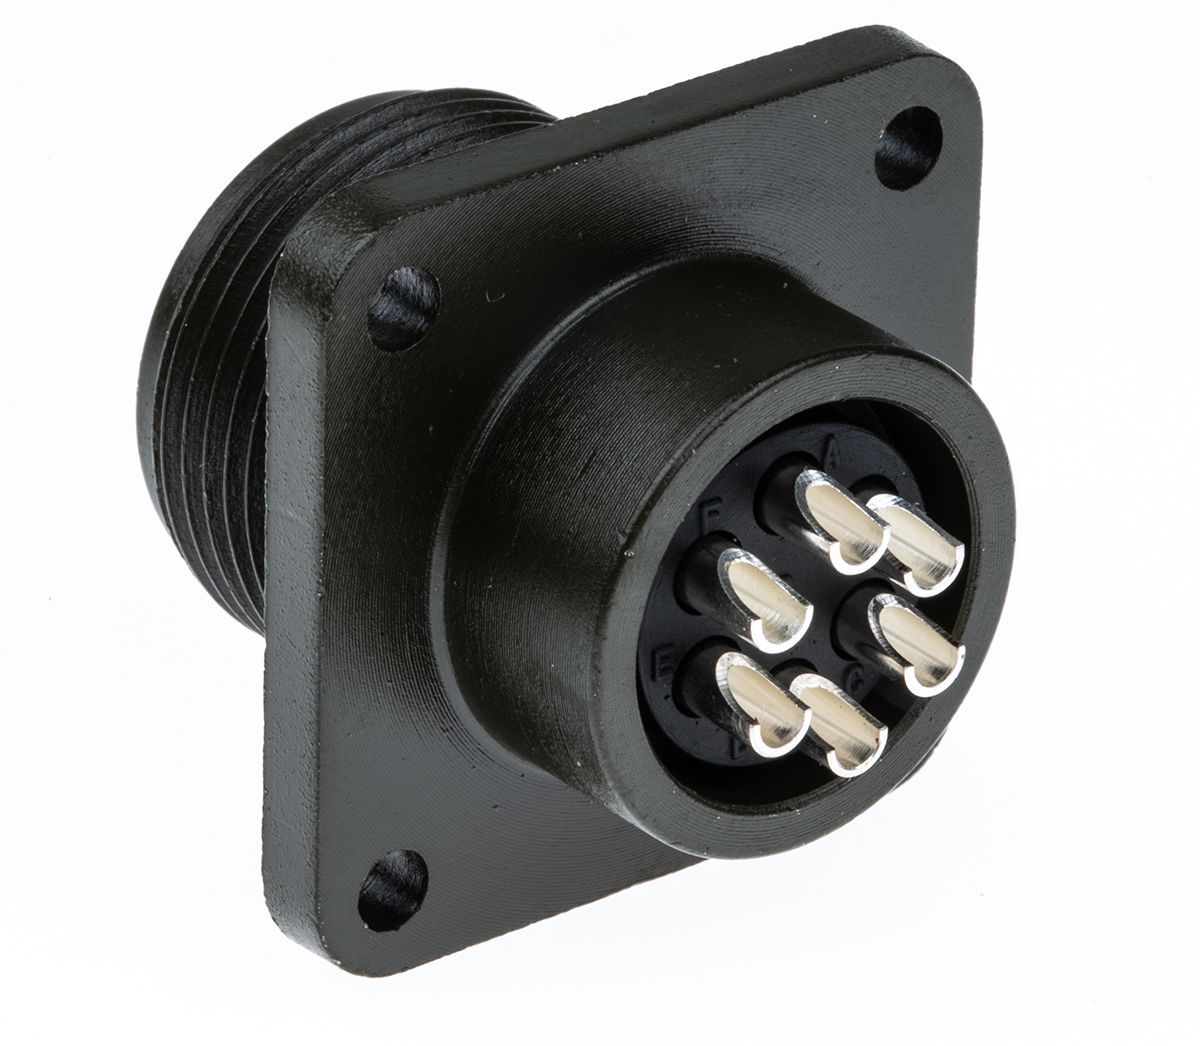 Amphenol Industrial, MS3102A 6 Way Box Mount MIL Spec Circular Connector Receptacle, Socket Contacts,Shell Size 14S,